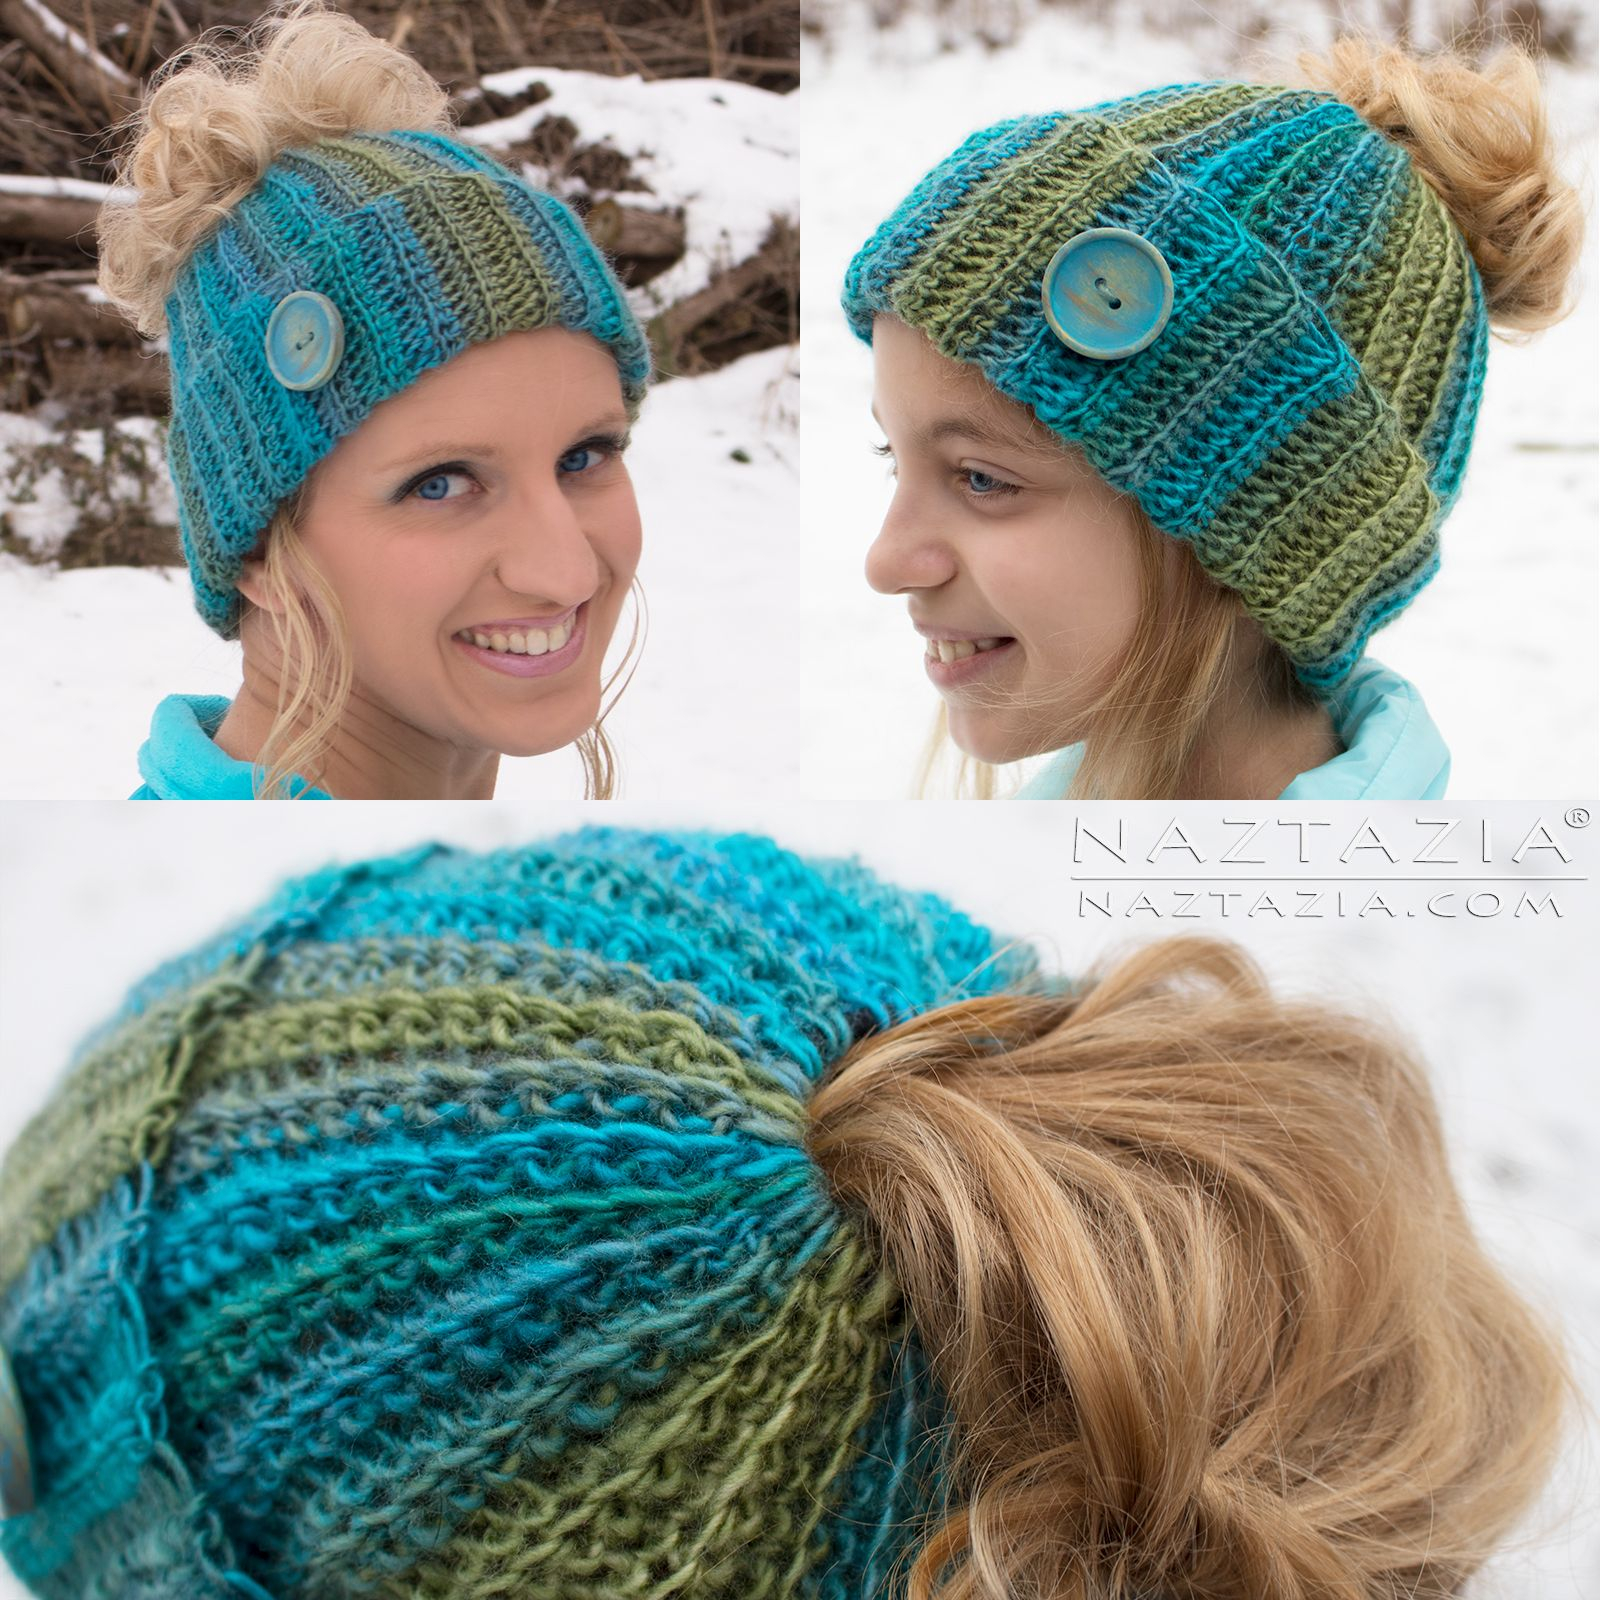 Ponytail Crochet Hat Pattern Free Diy Free Pattern And Youtube Tutorial Video For Crochet Ribbed Bun